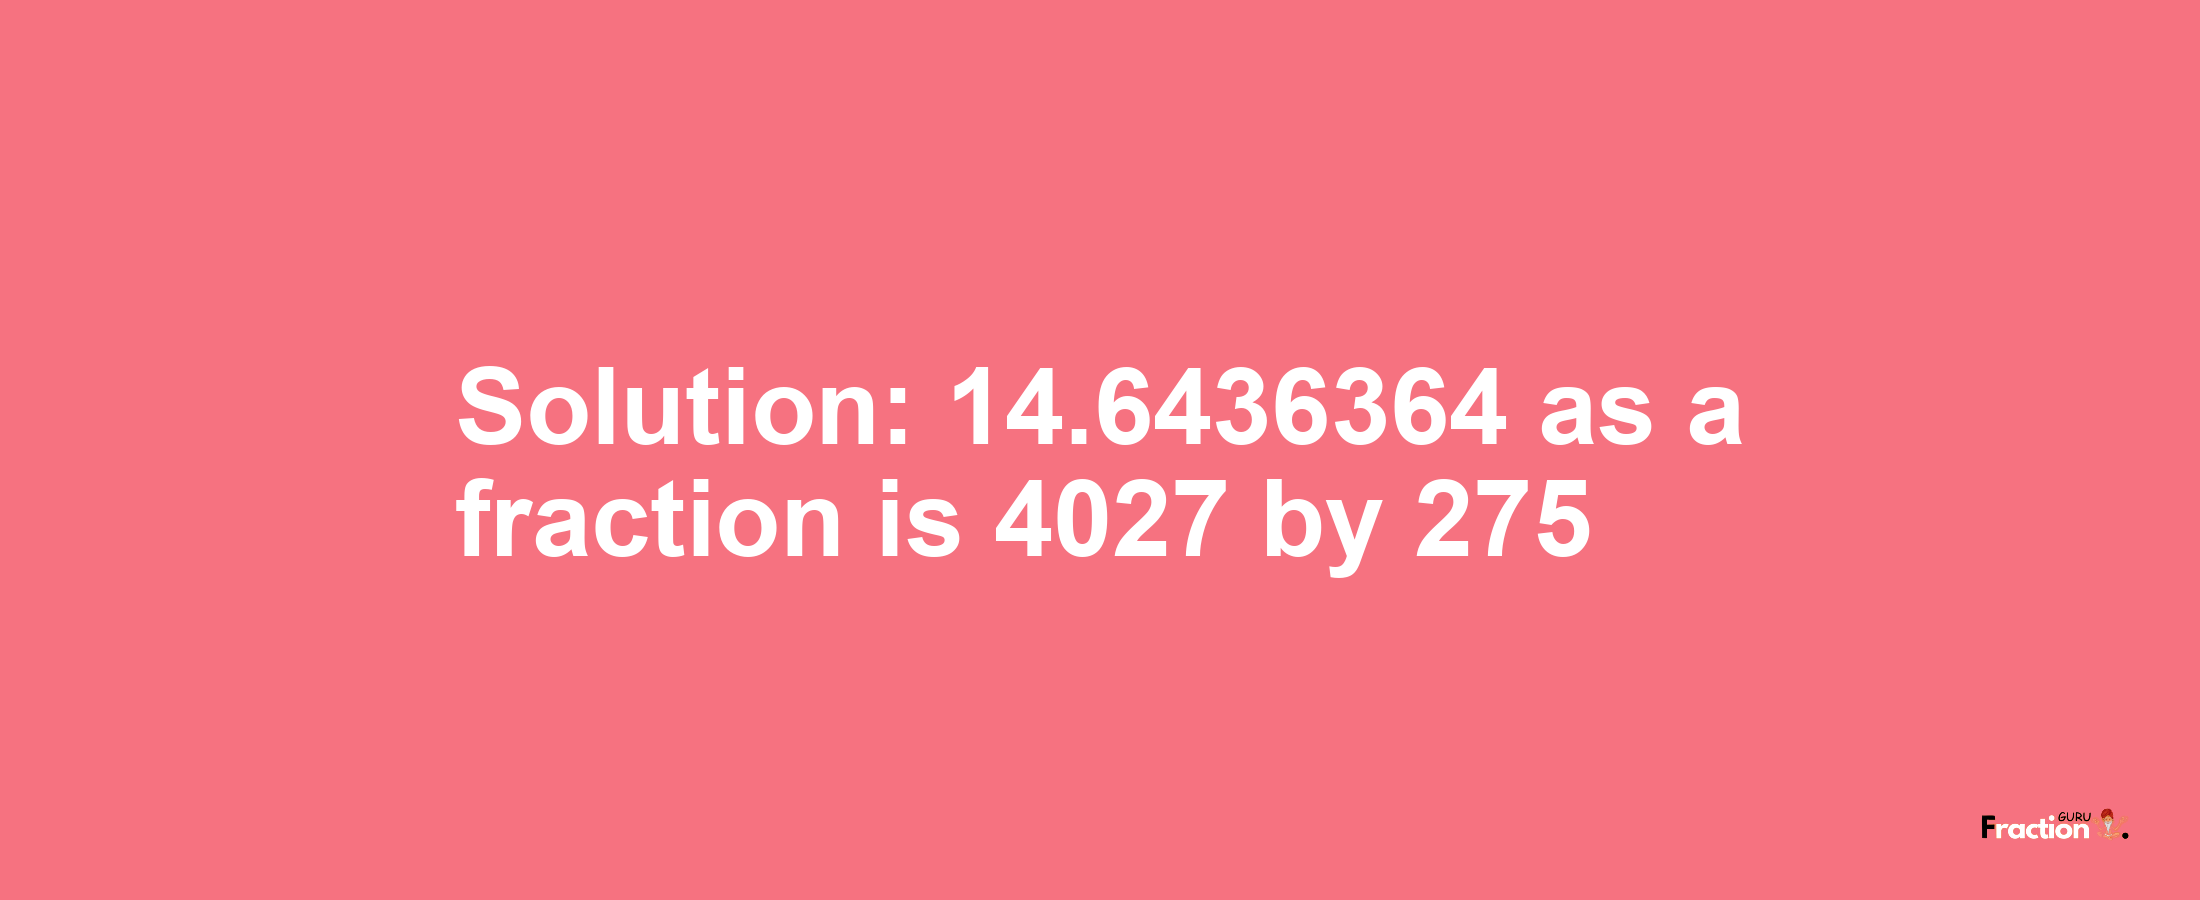 Solution:14.6436364 as a fraction is 4027/275